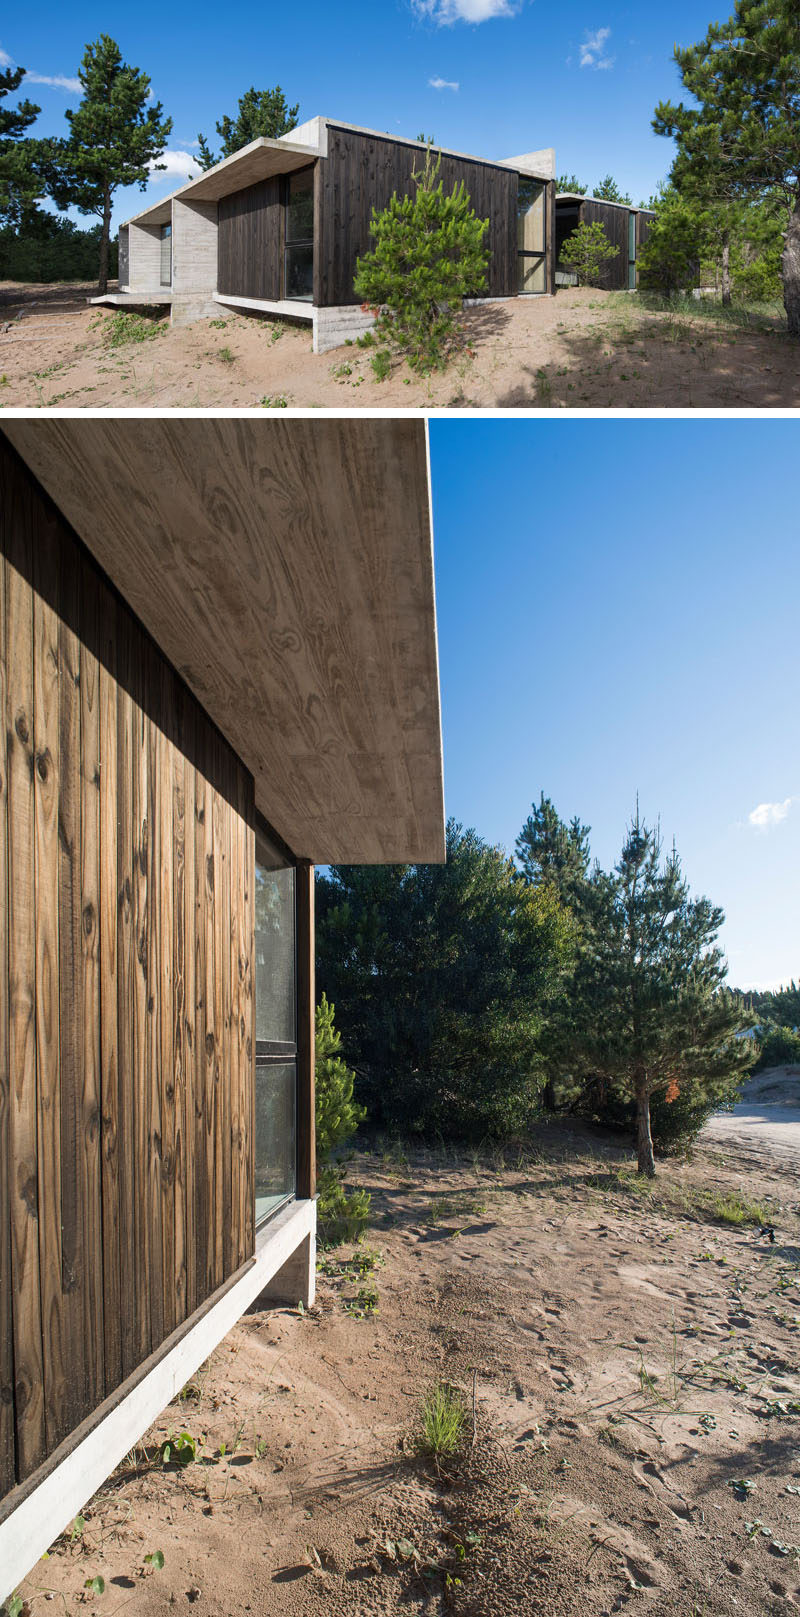 the architects used common pine wood treated with burnt oil, to break up the use of concrete on this modern house. #ModernHouse #WoodExterior #ConcreteHouse